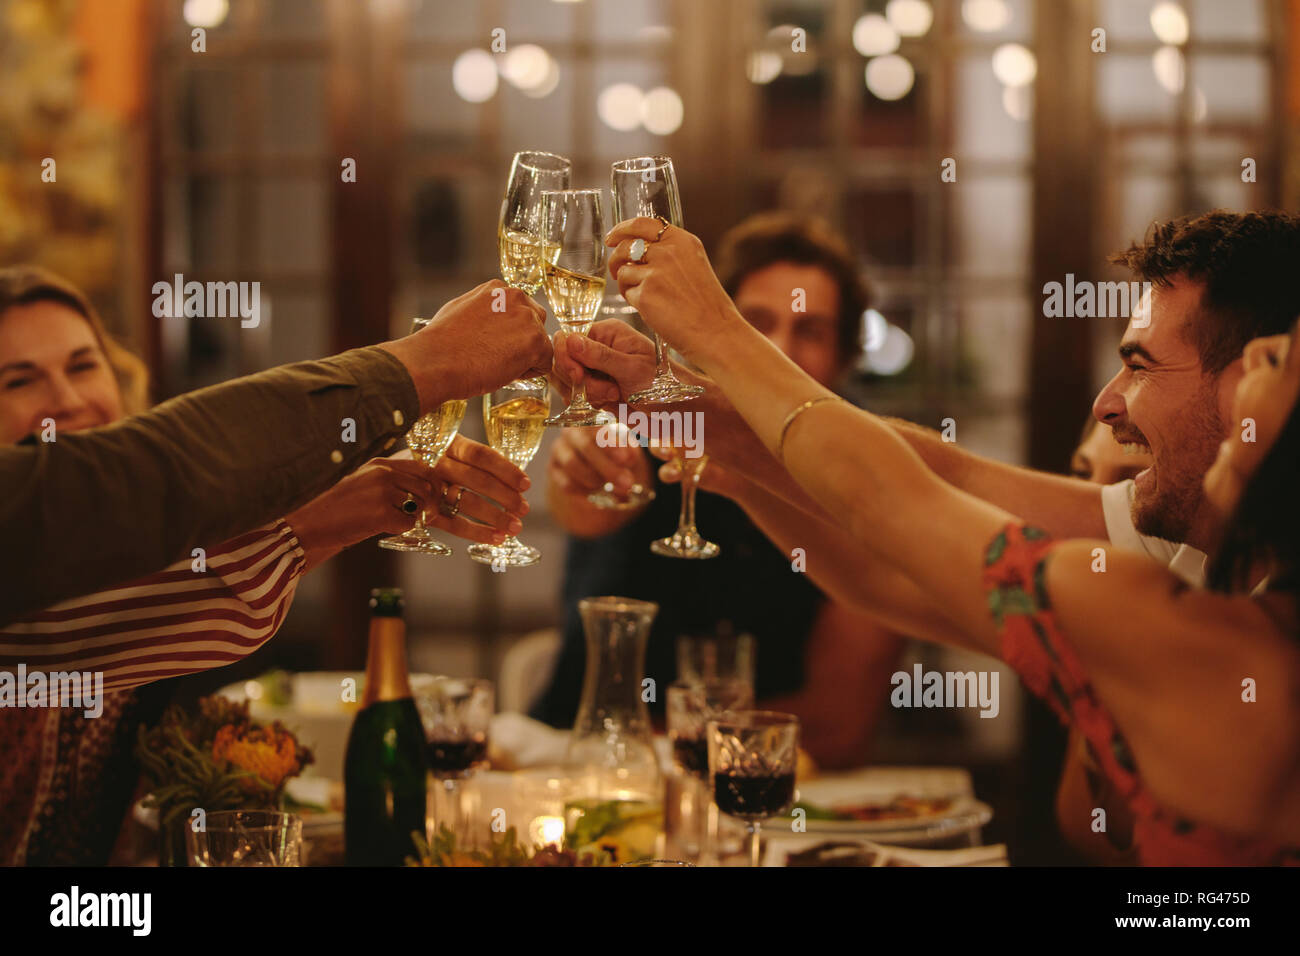 Group of people toasting drinks at a party. Young friends having drinks to celebrate a special occasion. Stock Photo